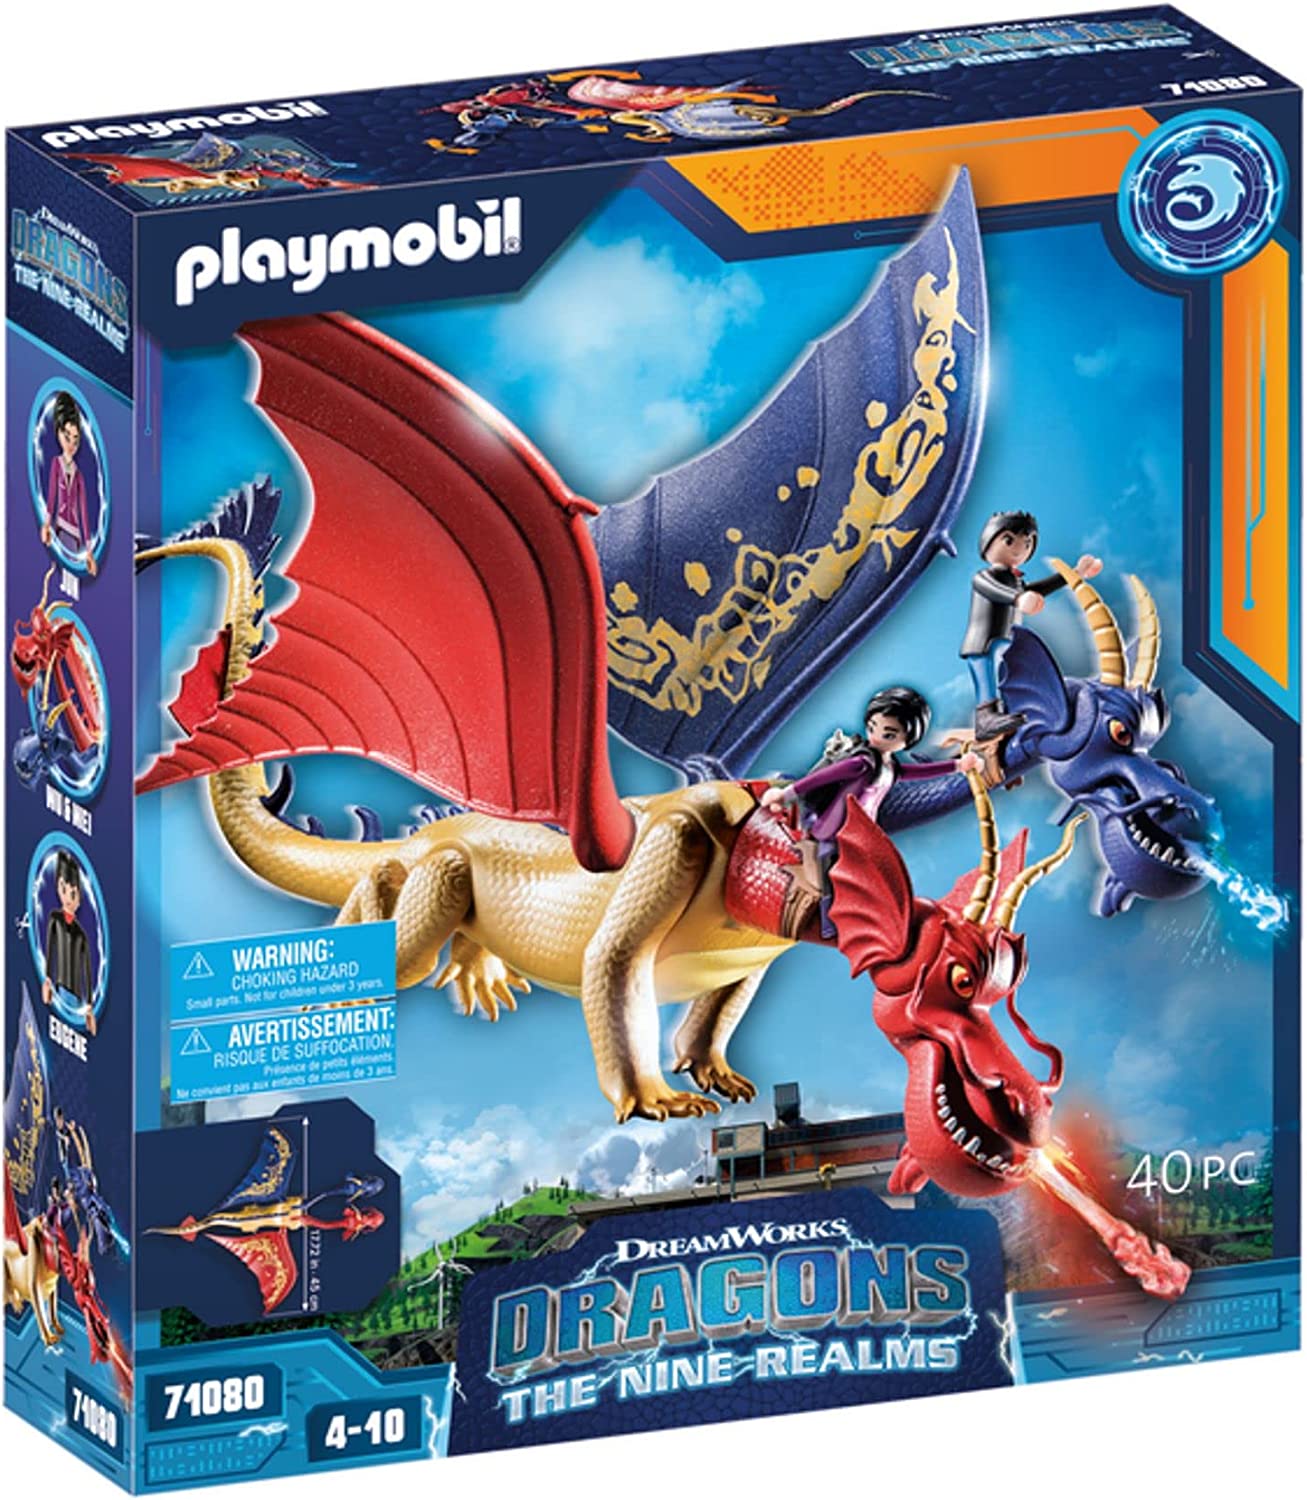 PLAYMOBIL DreamWorks Dragons 71080 Dragons: The Nine Realms - Wu & Wei with Jun, Dragons Figures and Toy Dragon with Shooting Function, Toy for Children from 4 Years